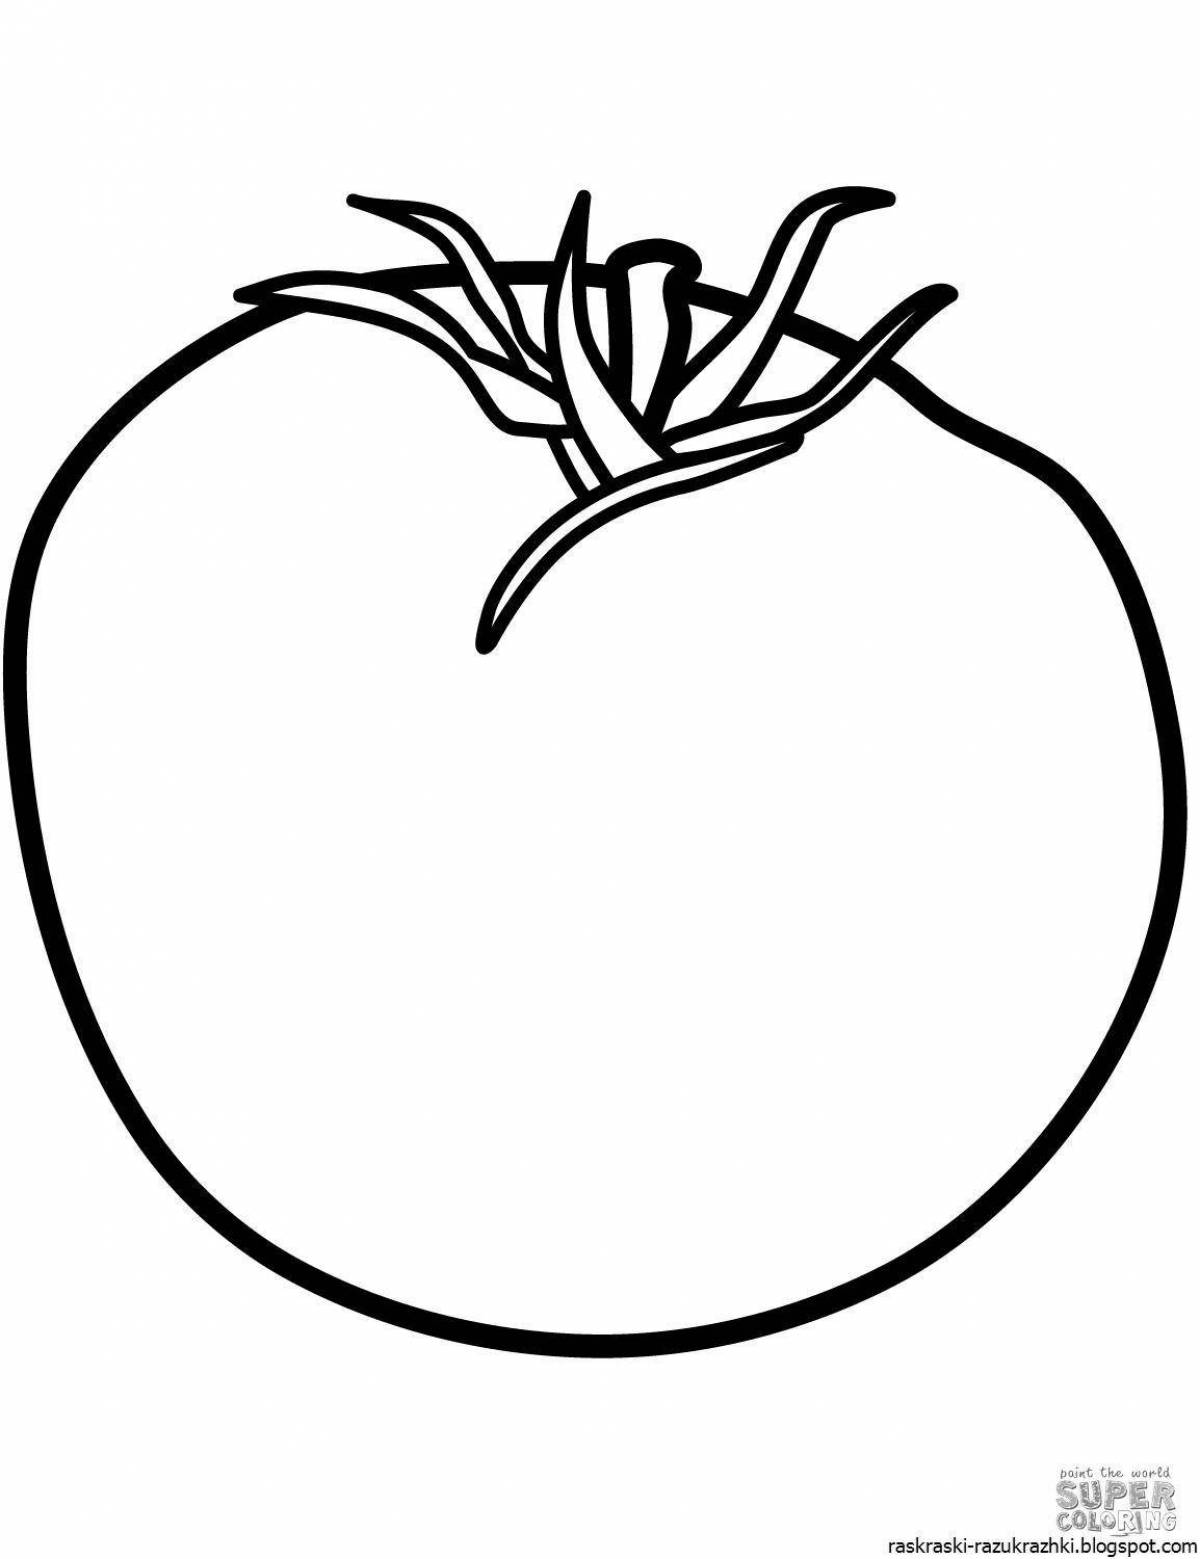 Playful tomato coloring page